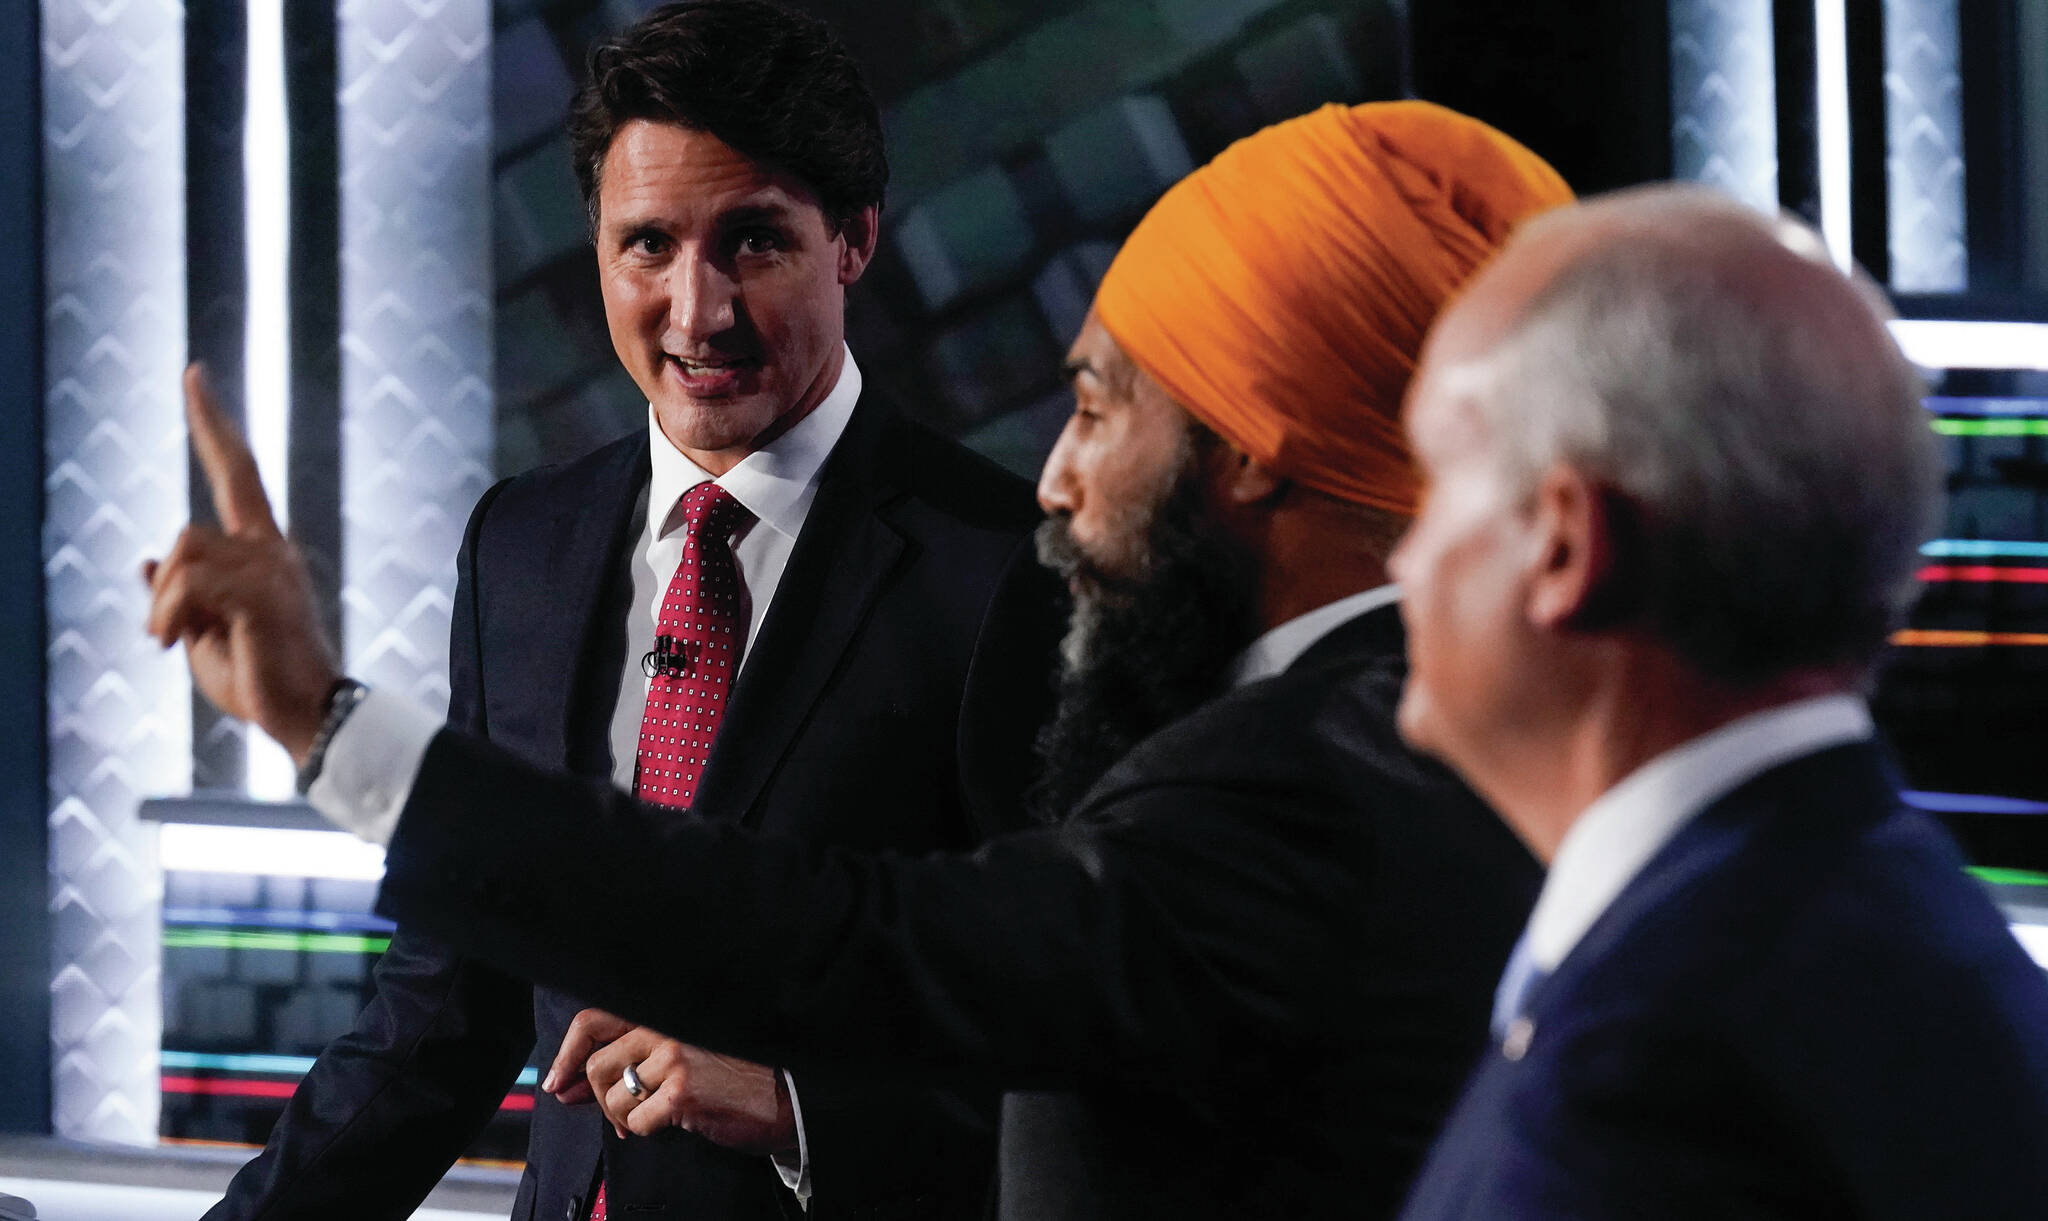 Liberal Leader Justin Trudeau, left to right, NDP Leader Jagmeet Singh, and Conservative Leader Erin O’Toole take part in the federal election English-language Leaders debate in Gatineau, Que., on Thursday, Sept. 9, 2021. Do you know which party received the greatest share of the popular vote in that election? THE CANADIAN PRESS/Adrian Wyld